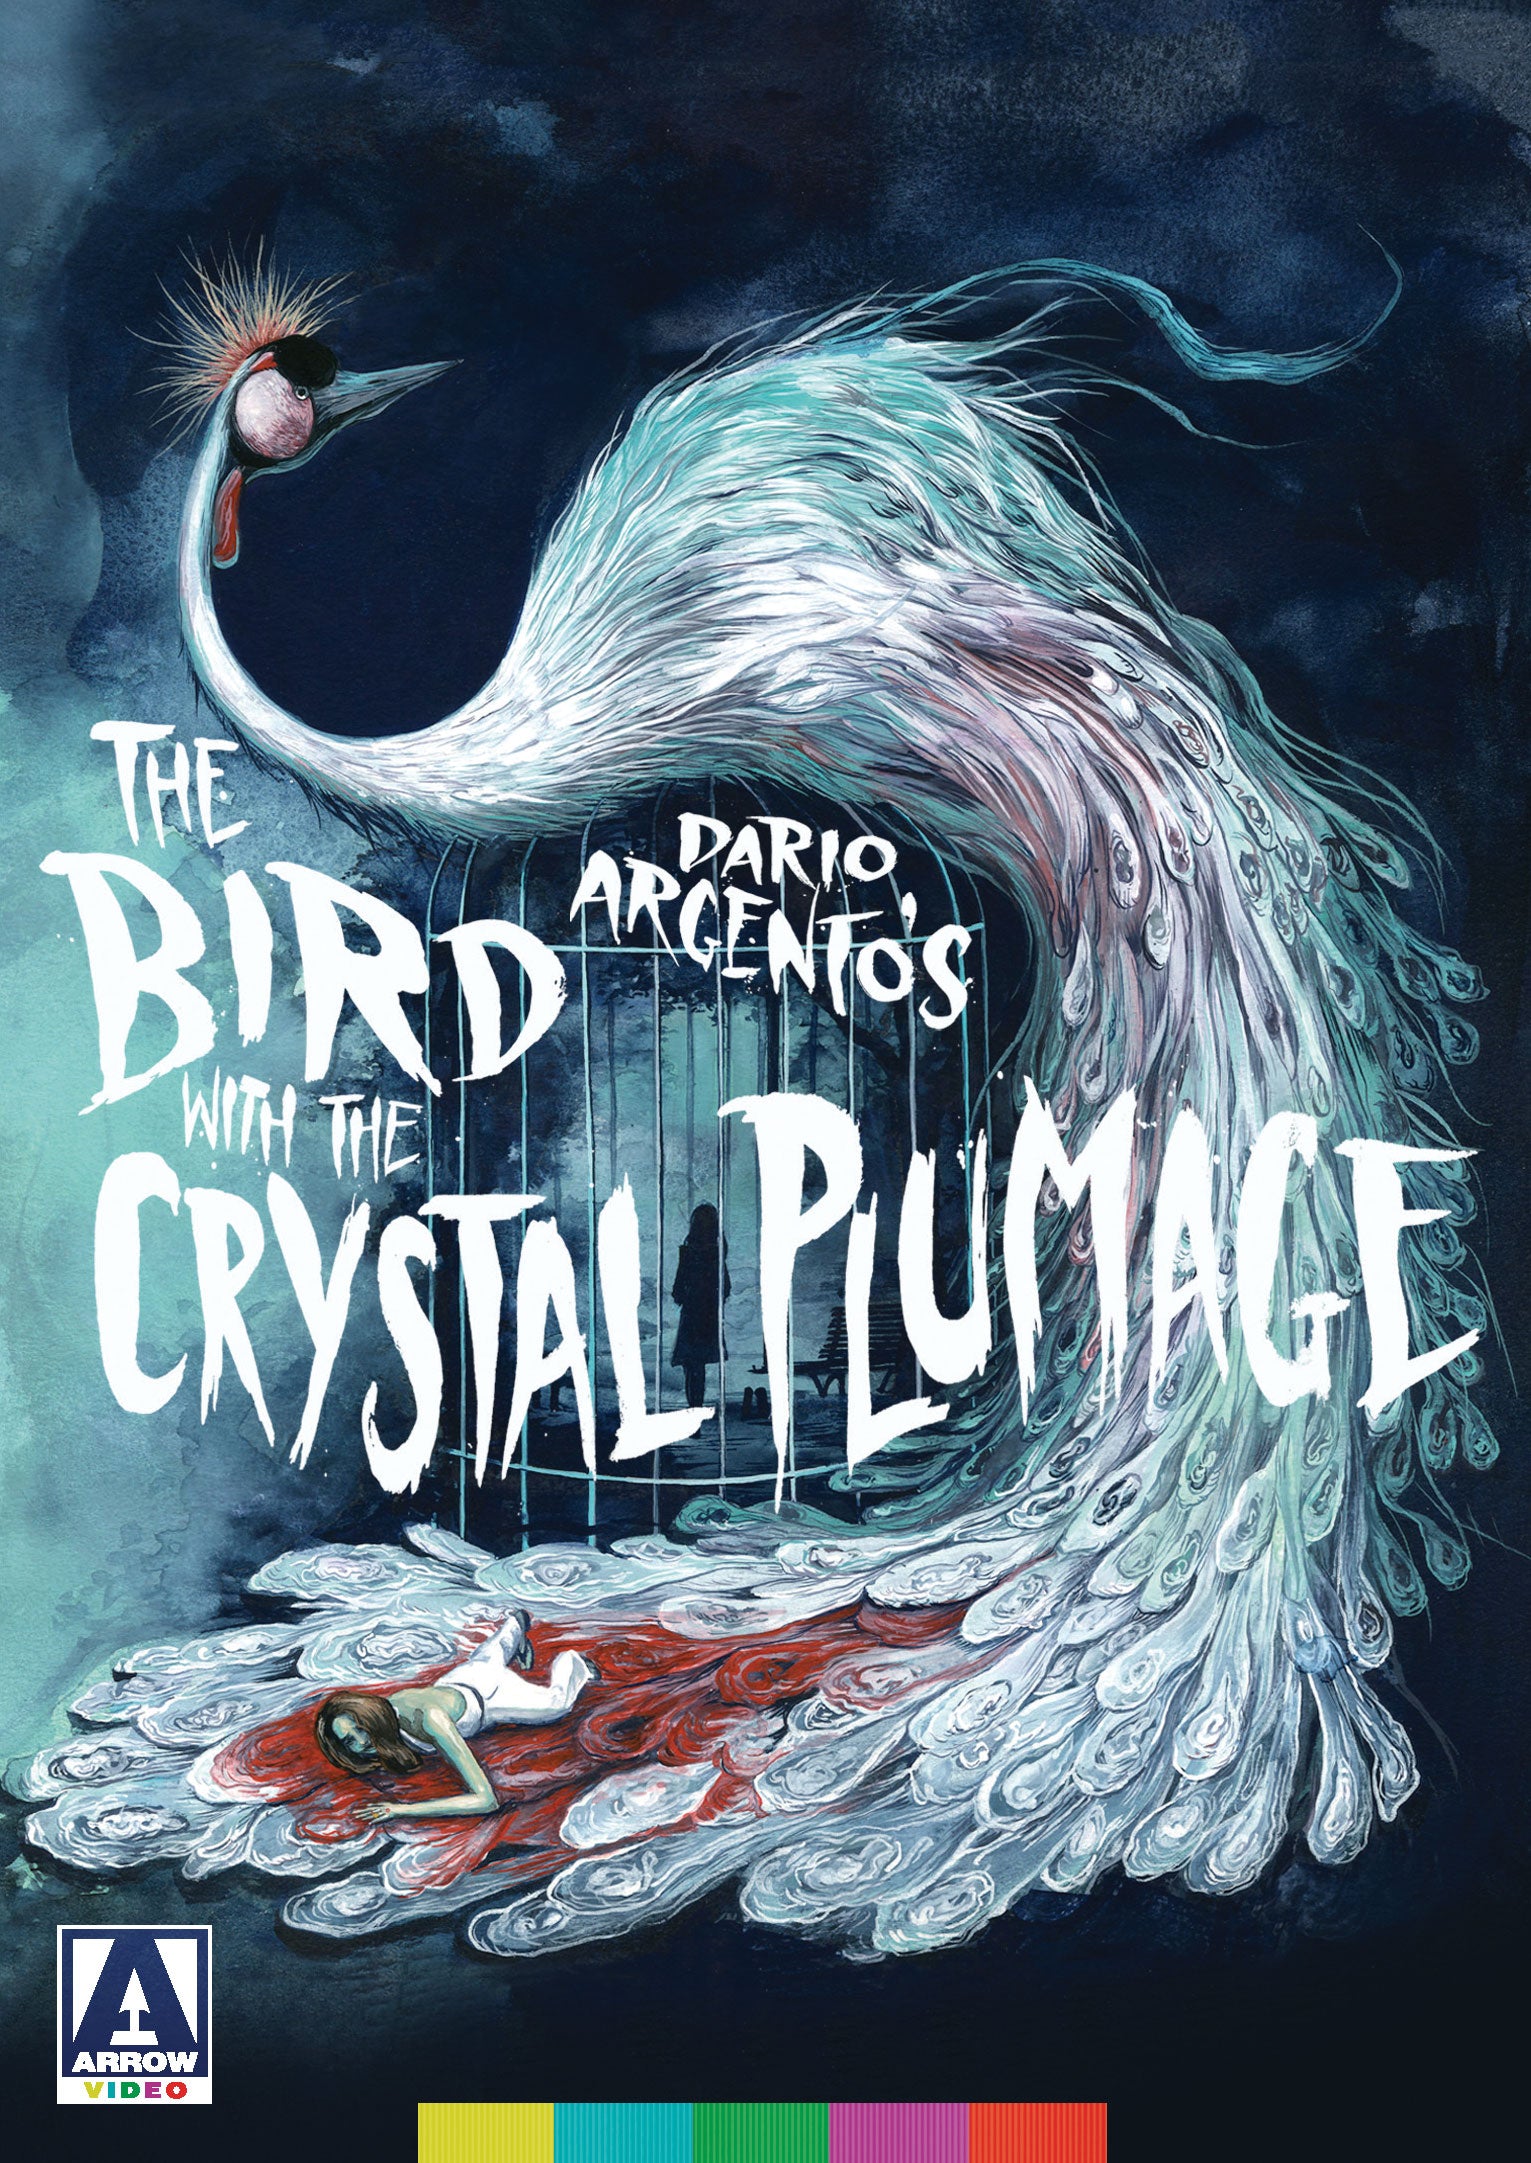 THE BIRD WITH THE CRYSTAL PLUMAGE DVD